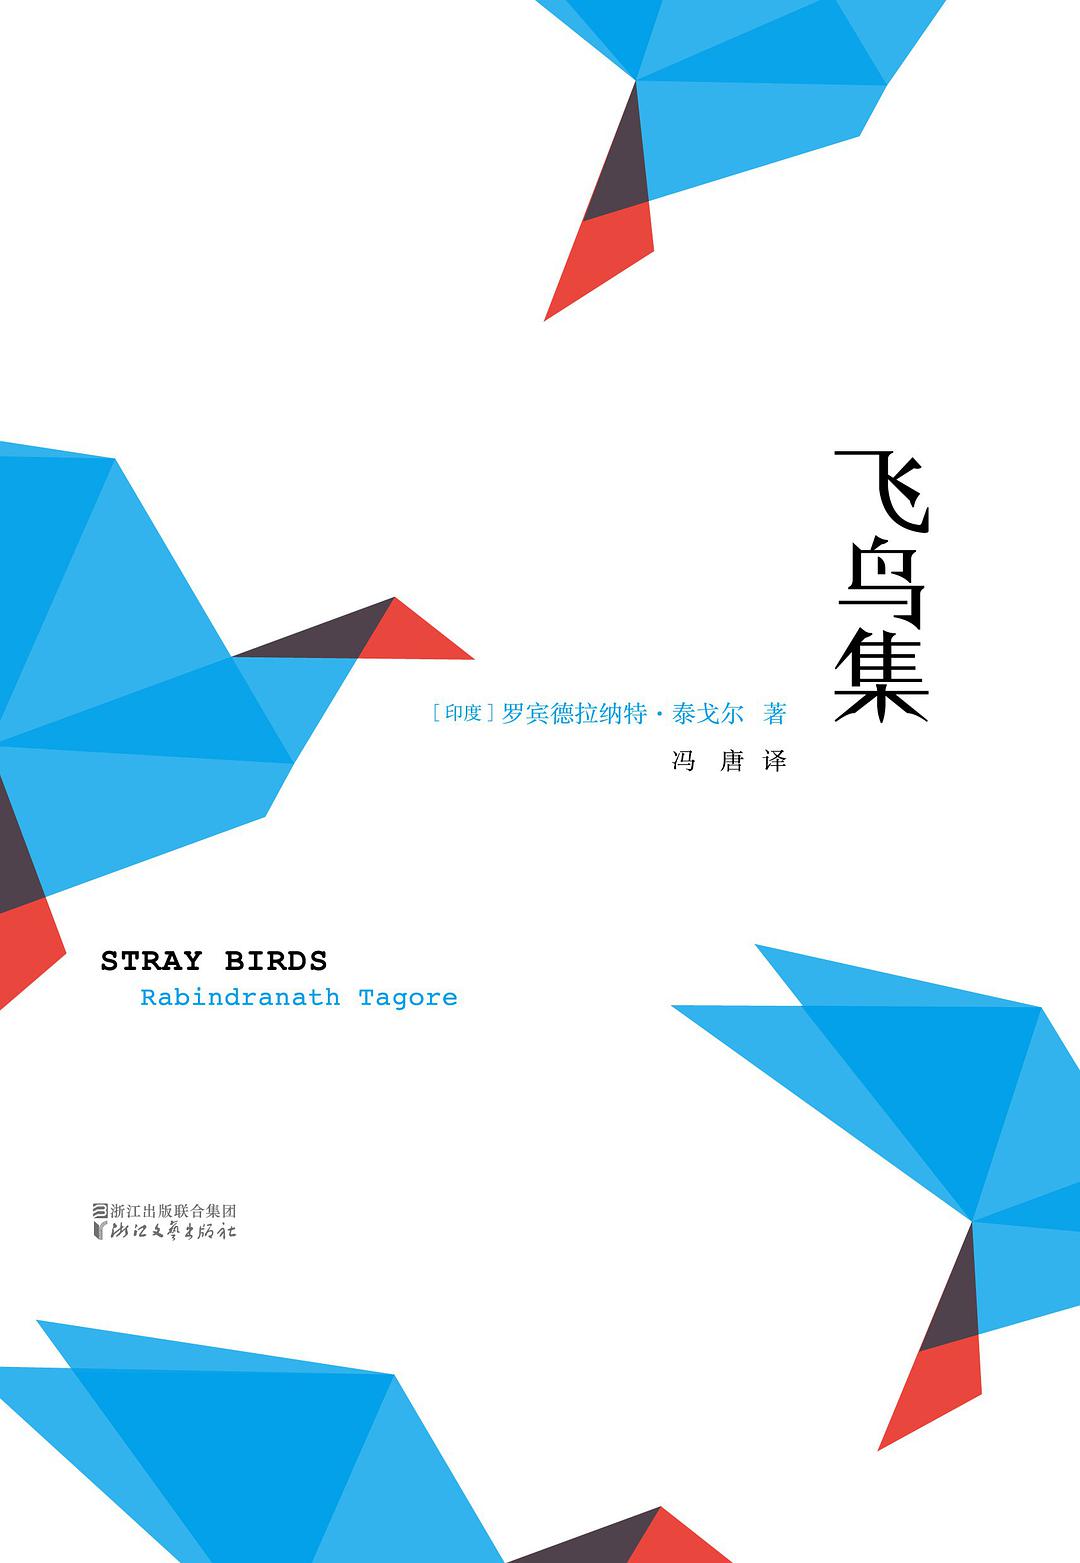 "Flying Birds" translated by Feng Tang